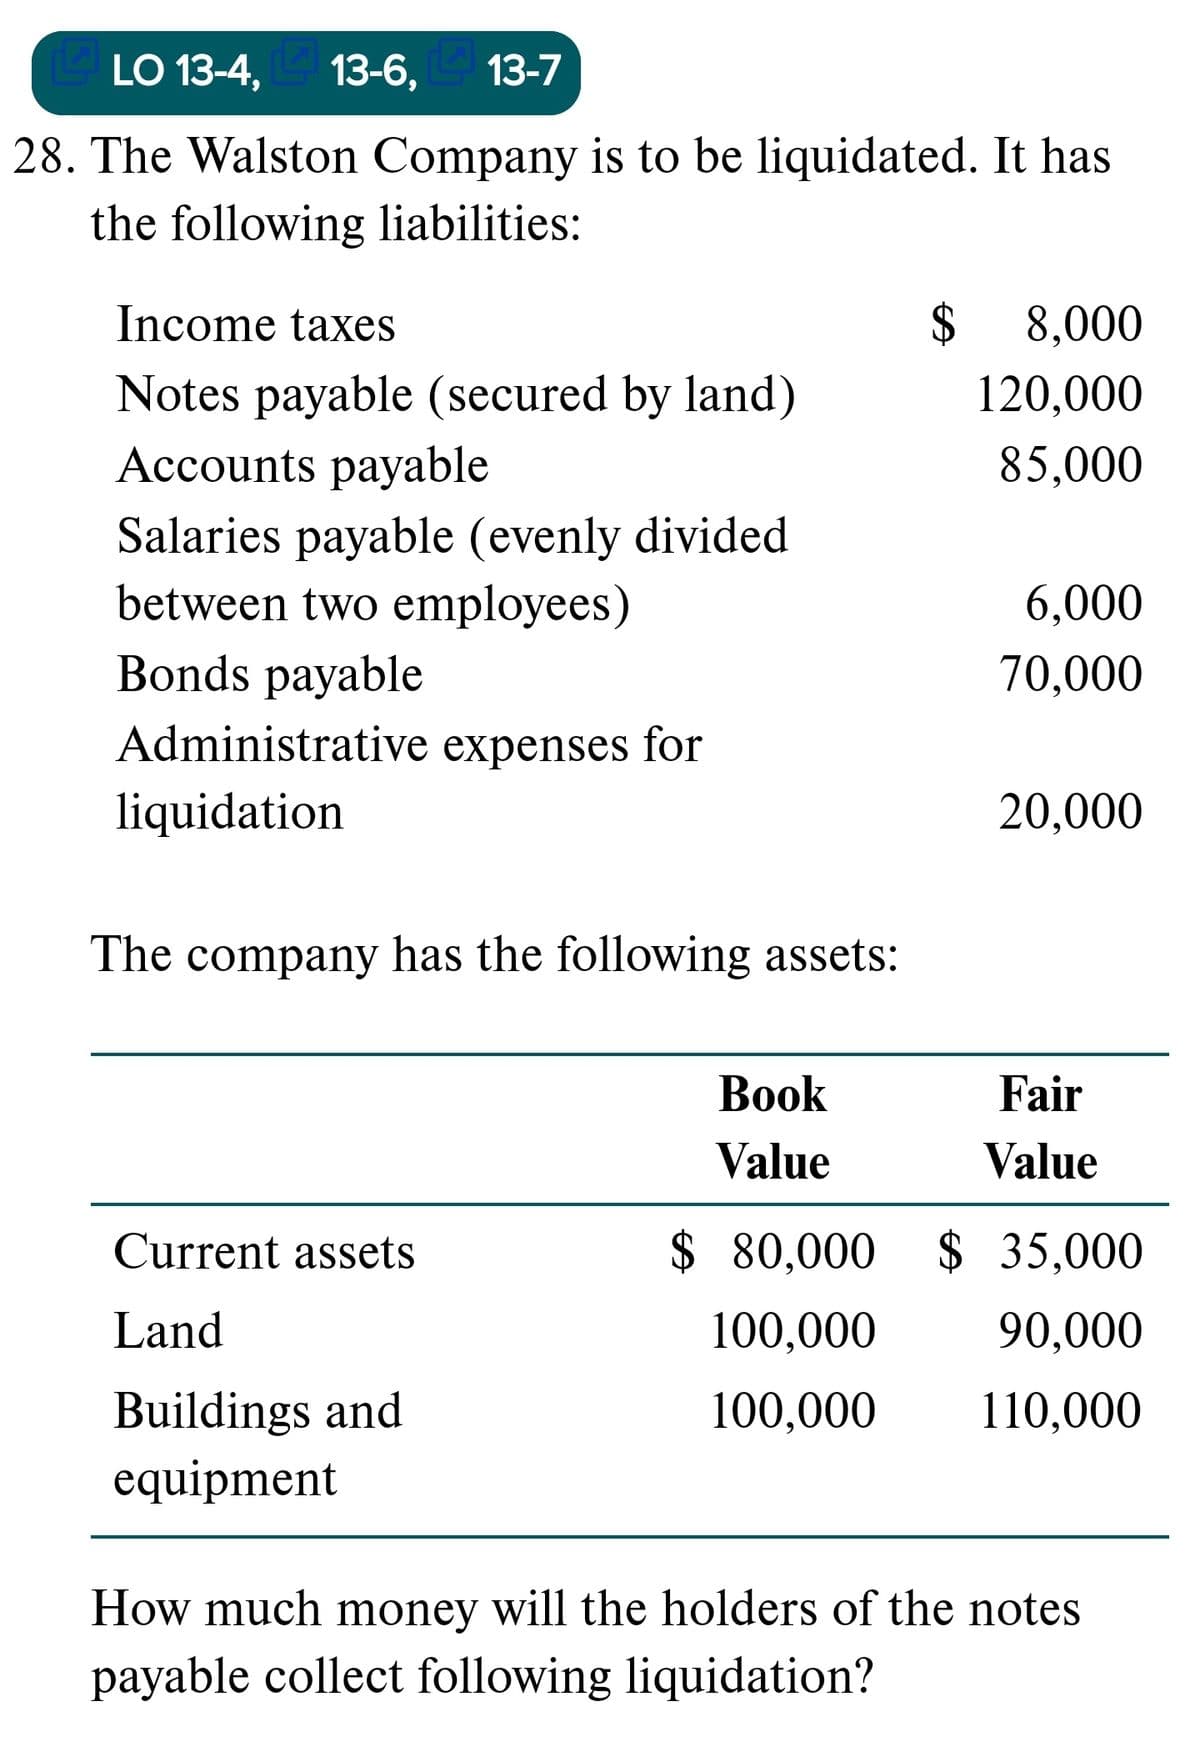 LO 13-4,
13-6,
E 13-7
28. The Walston Company is to be liquidated. It has
the following liabilities:
Income taxes
$ 8,000
Notes payable (secured by land)
Accounts payable
120,000
85,000
Salaries payable (evenly divided
between two employees)
Bonds payable
Administrative expenses for
6,000
70,000
liquidation
20,000
The company has the following assets:
Вook
Fair
Value
Value
Current assets
$ 80,000 $ 35,000
Land
100,000
90,000
Buildings and
100,000
110,000
equipment
How much money will the holders of the notes
payable collect following liquidation?
